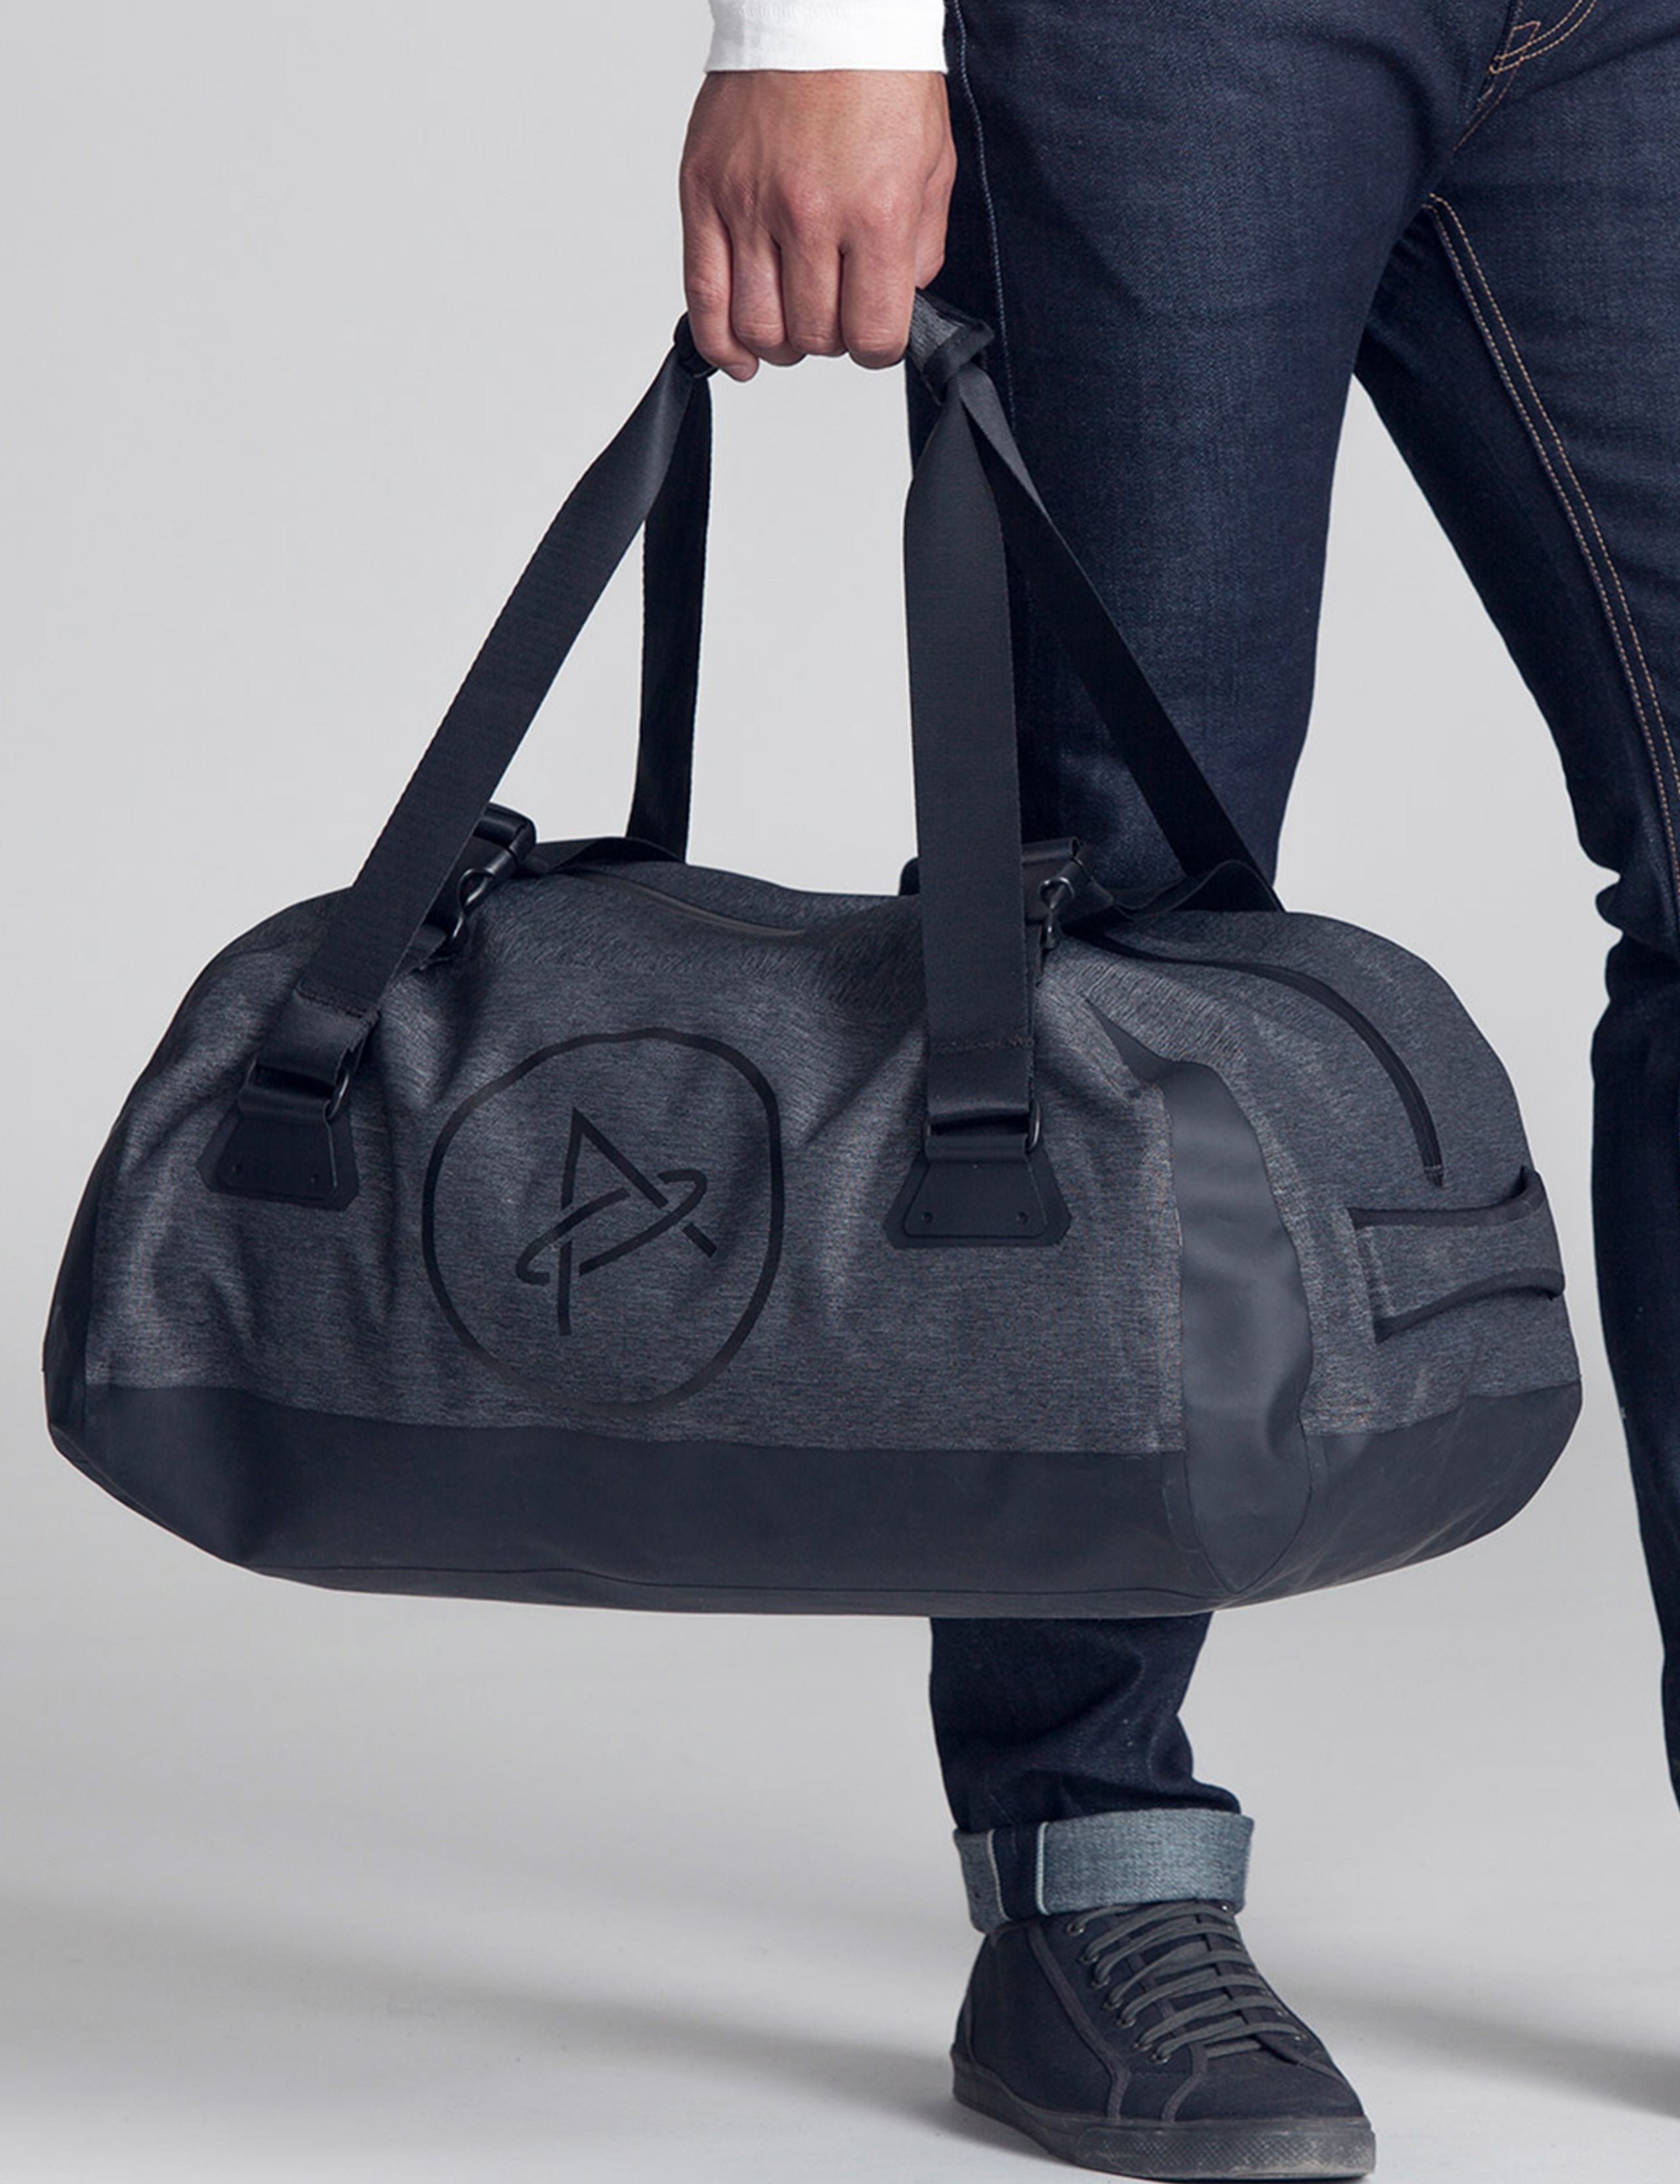 man holding grey duffle bag from AETHER Apparel